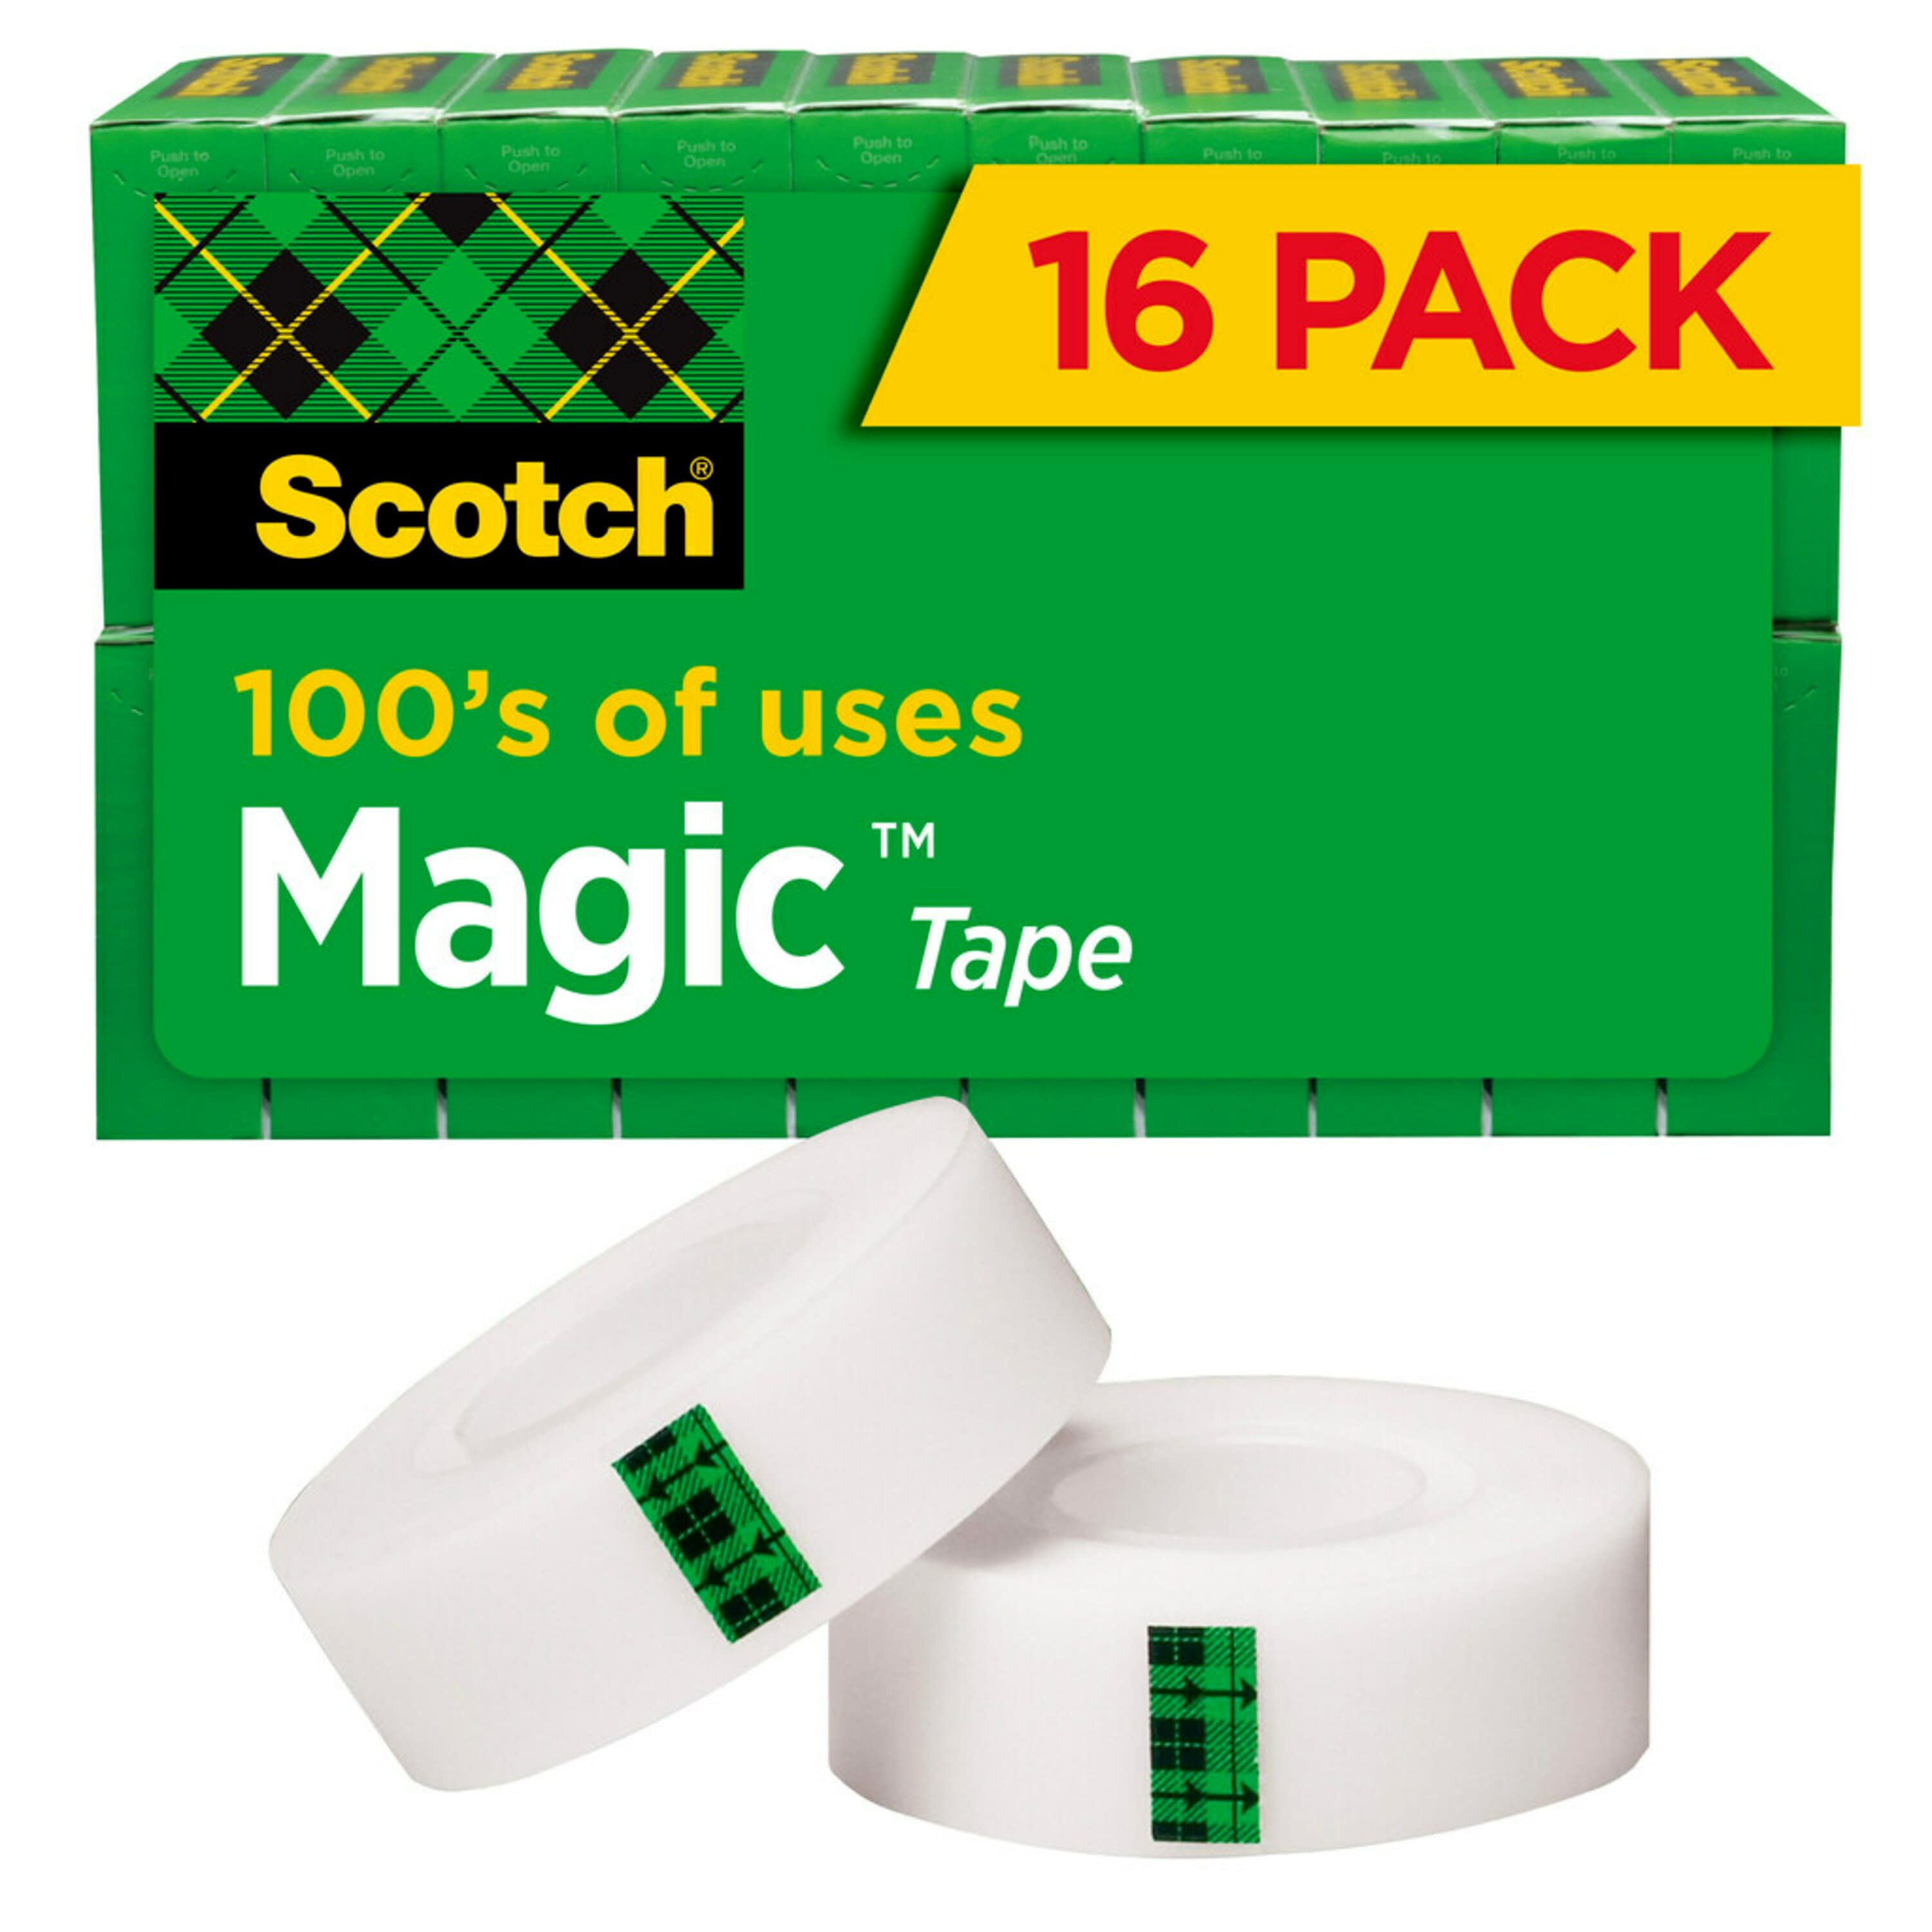 SCOTCH 3M INVISIBLE MAGIC TAPE ROLLS 19mm x 33m REMOVABLE MENDING TAPE GREEN BOX 